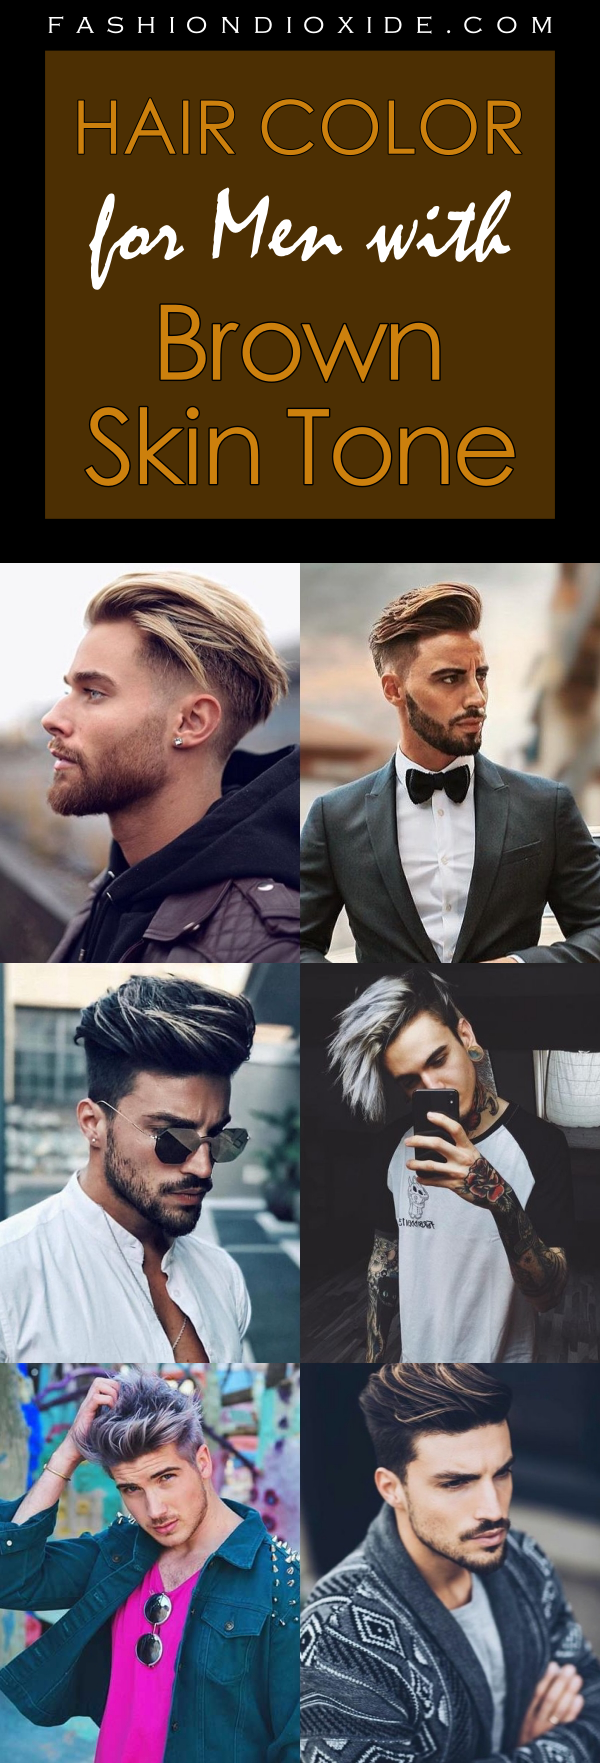 27 Hair Color for Men with Brown Skin Tone - Fashiondioxide